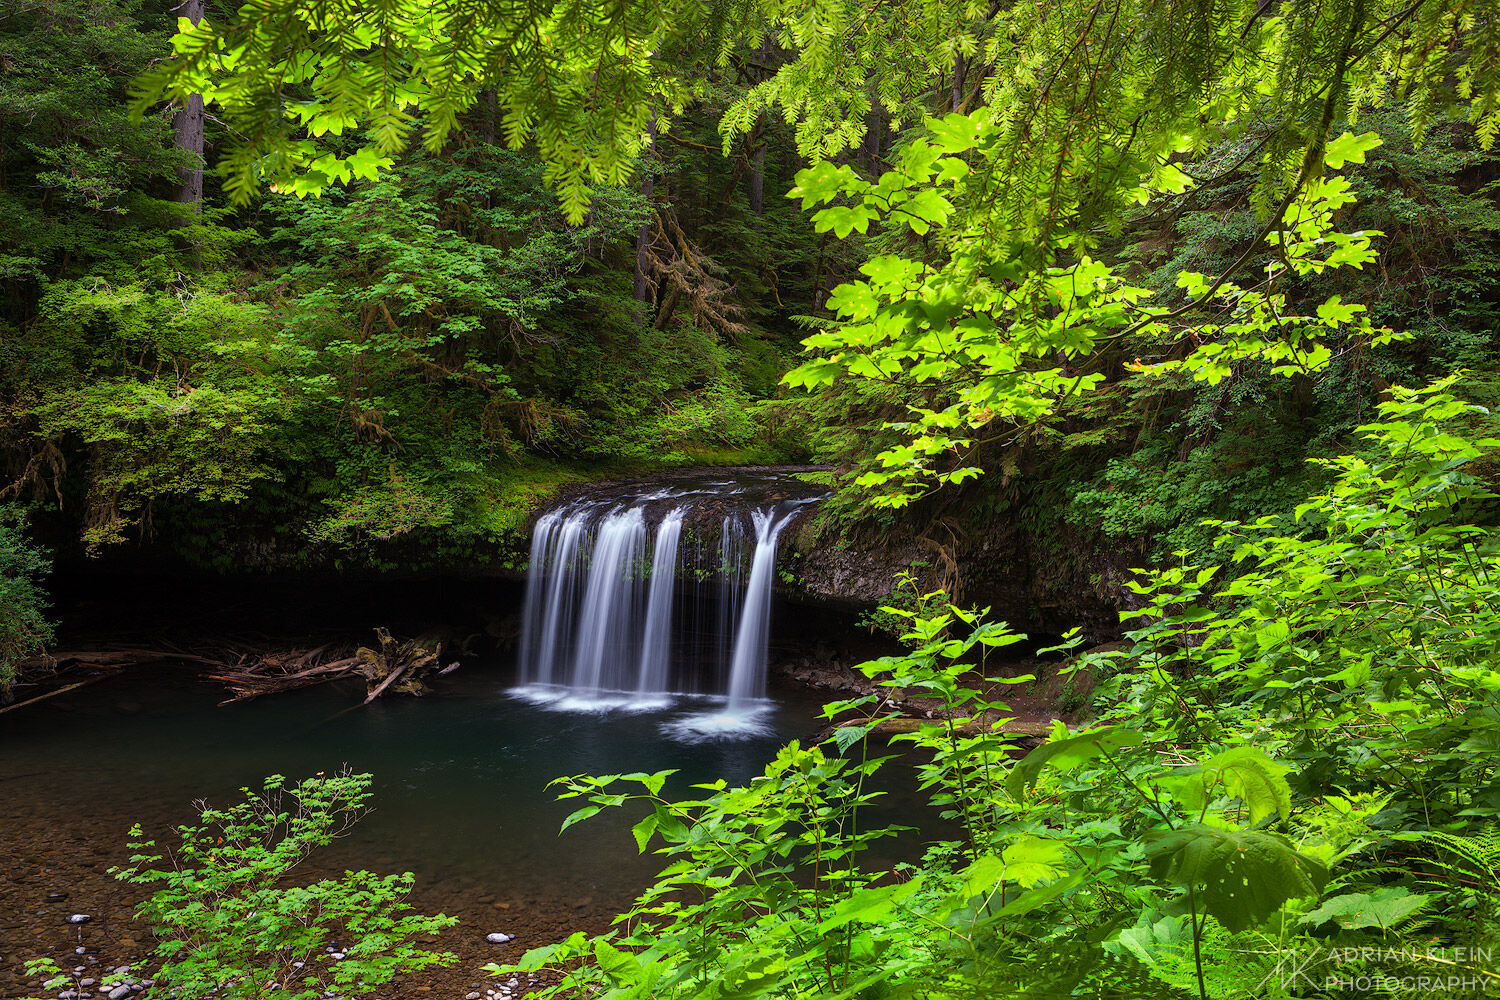 Upper Butte Creek Falls in the Willamette Valley of Oregon surrounded by lush green foliage during spring season. Limited Edition...